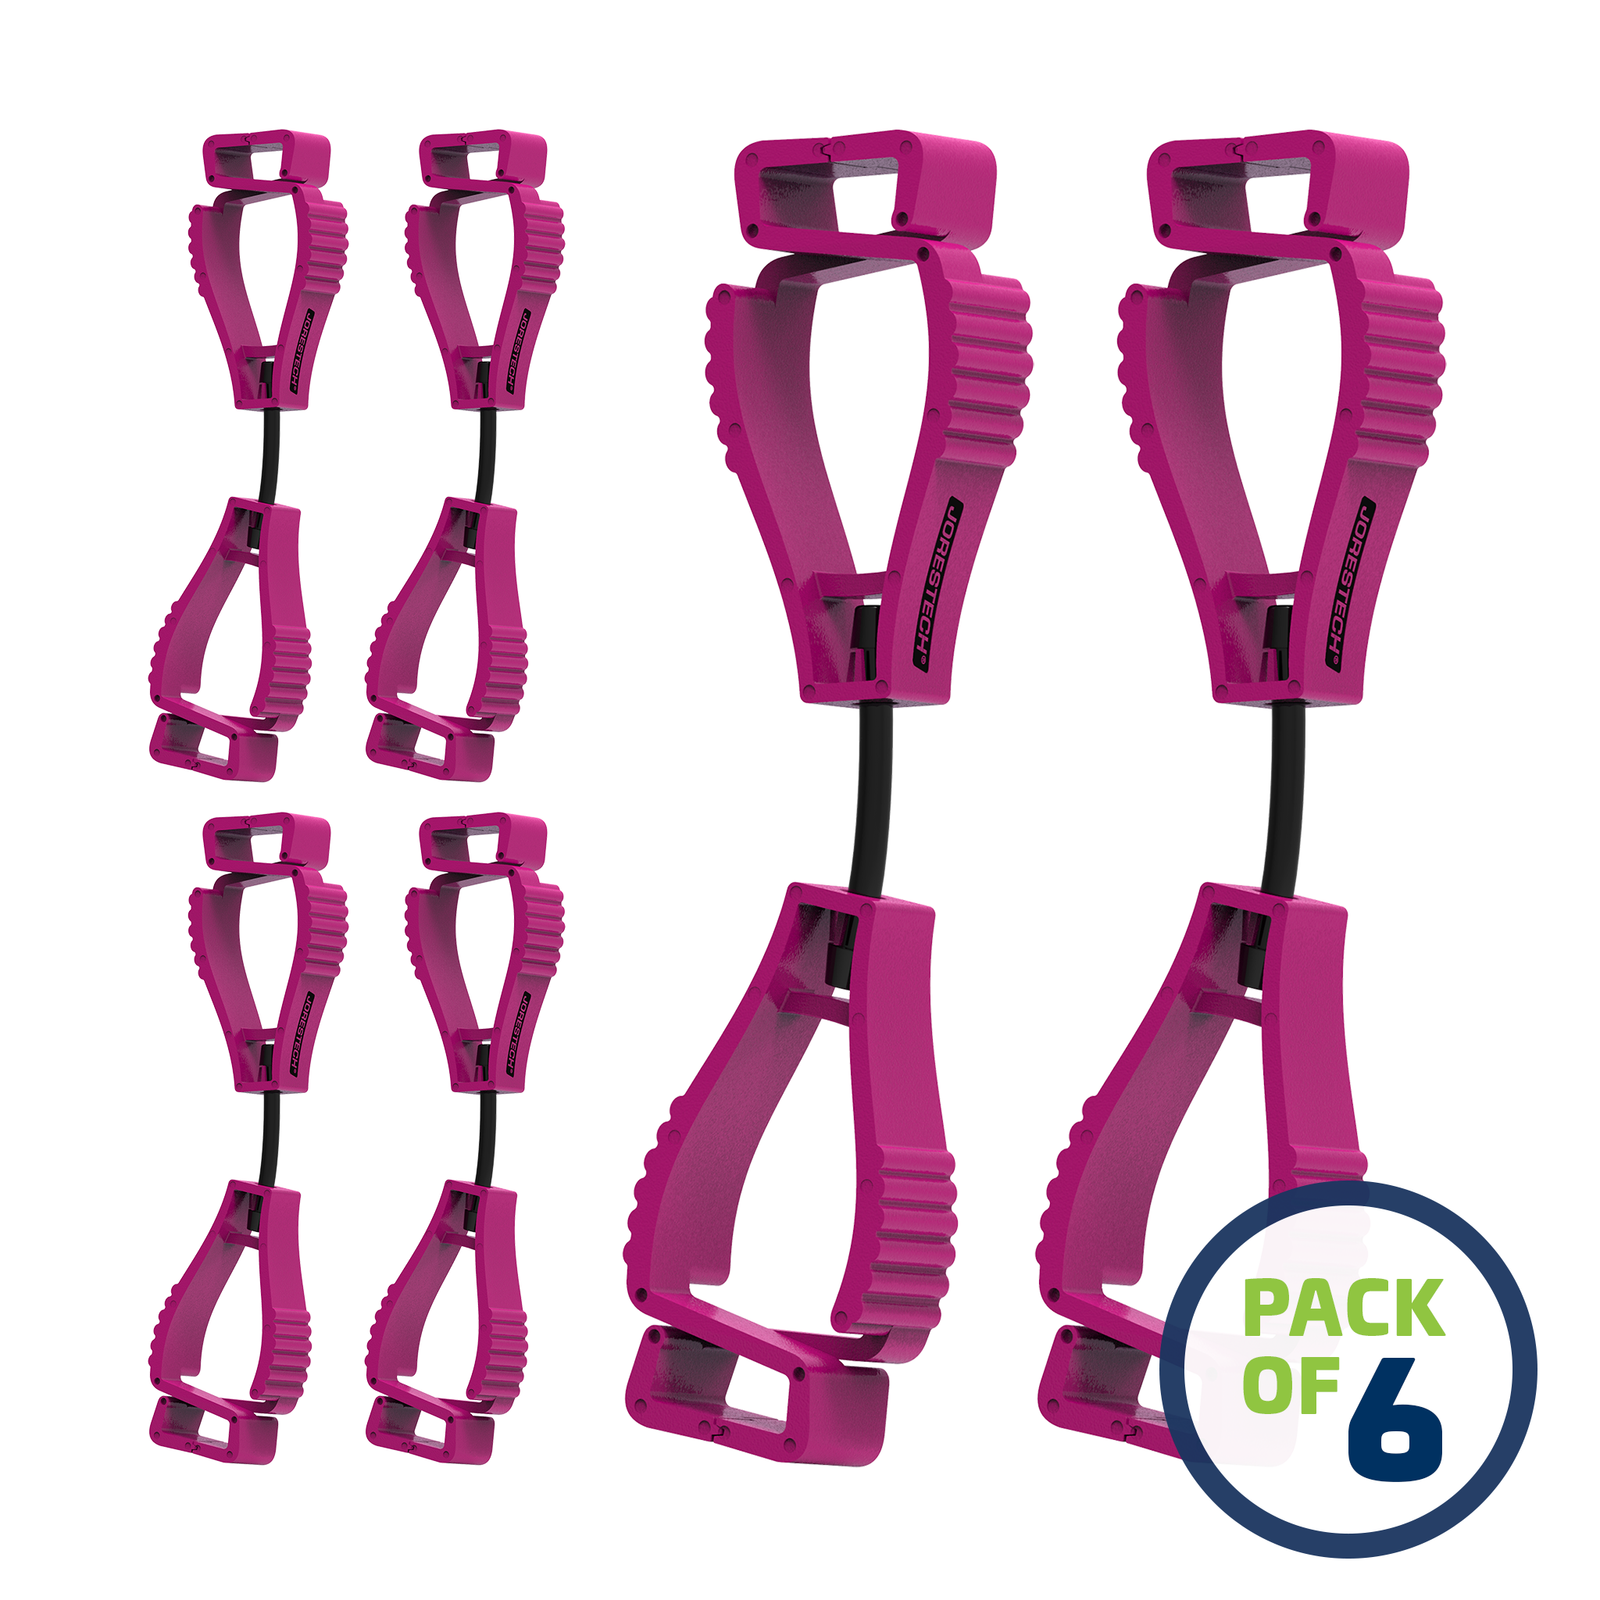 Pack of 6 Pink clip safety holders